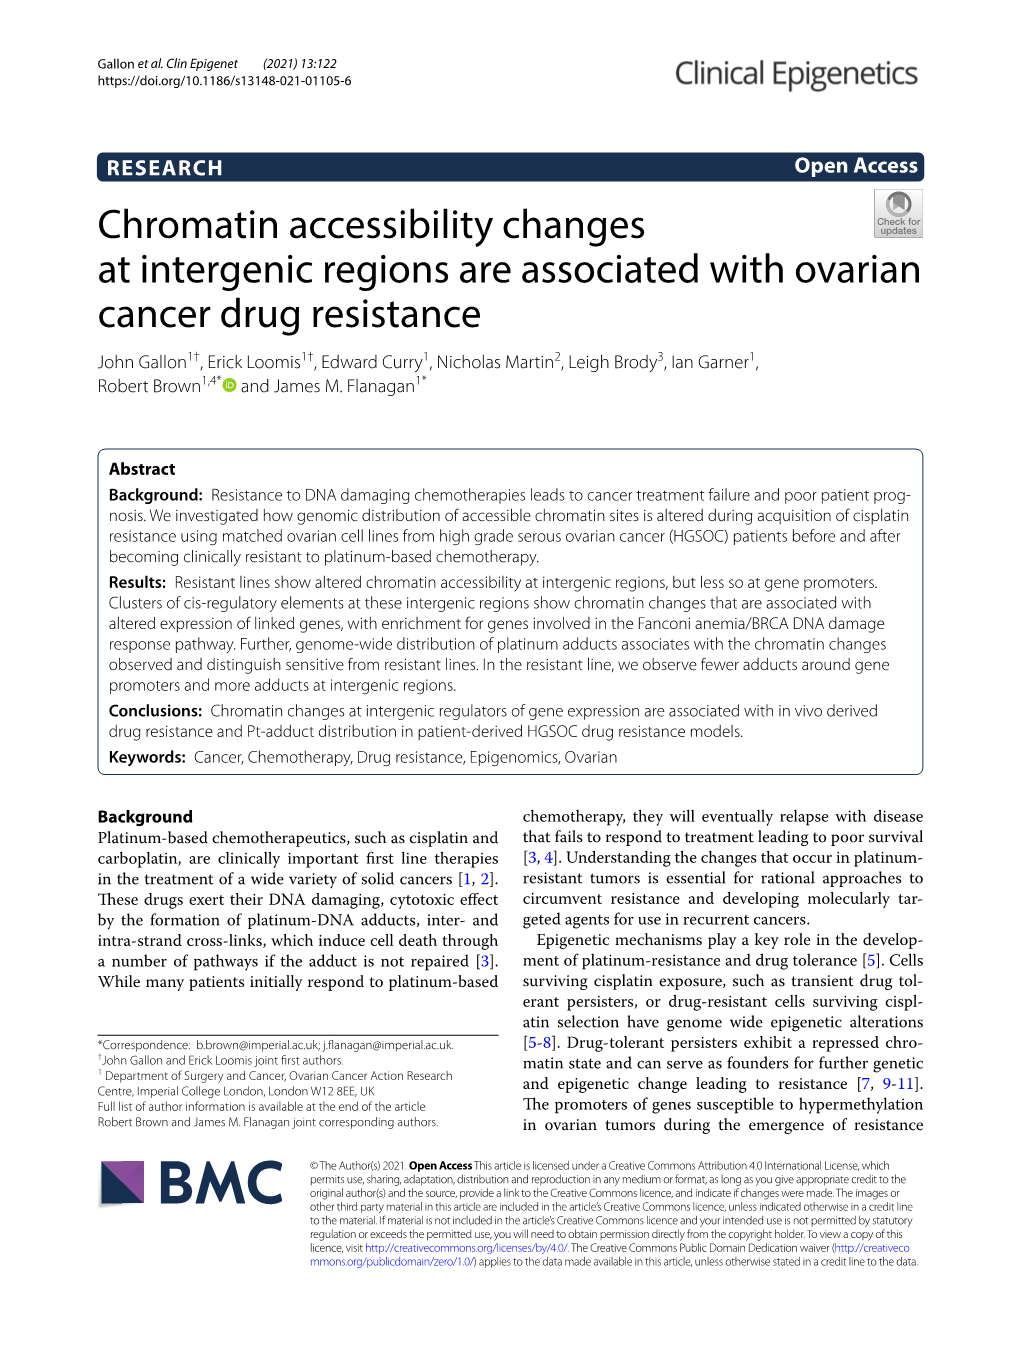 Chromatin Accessibility Changes at Intergenic Regions Associated with Ovarian Cancer Drug Resistance